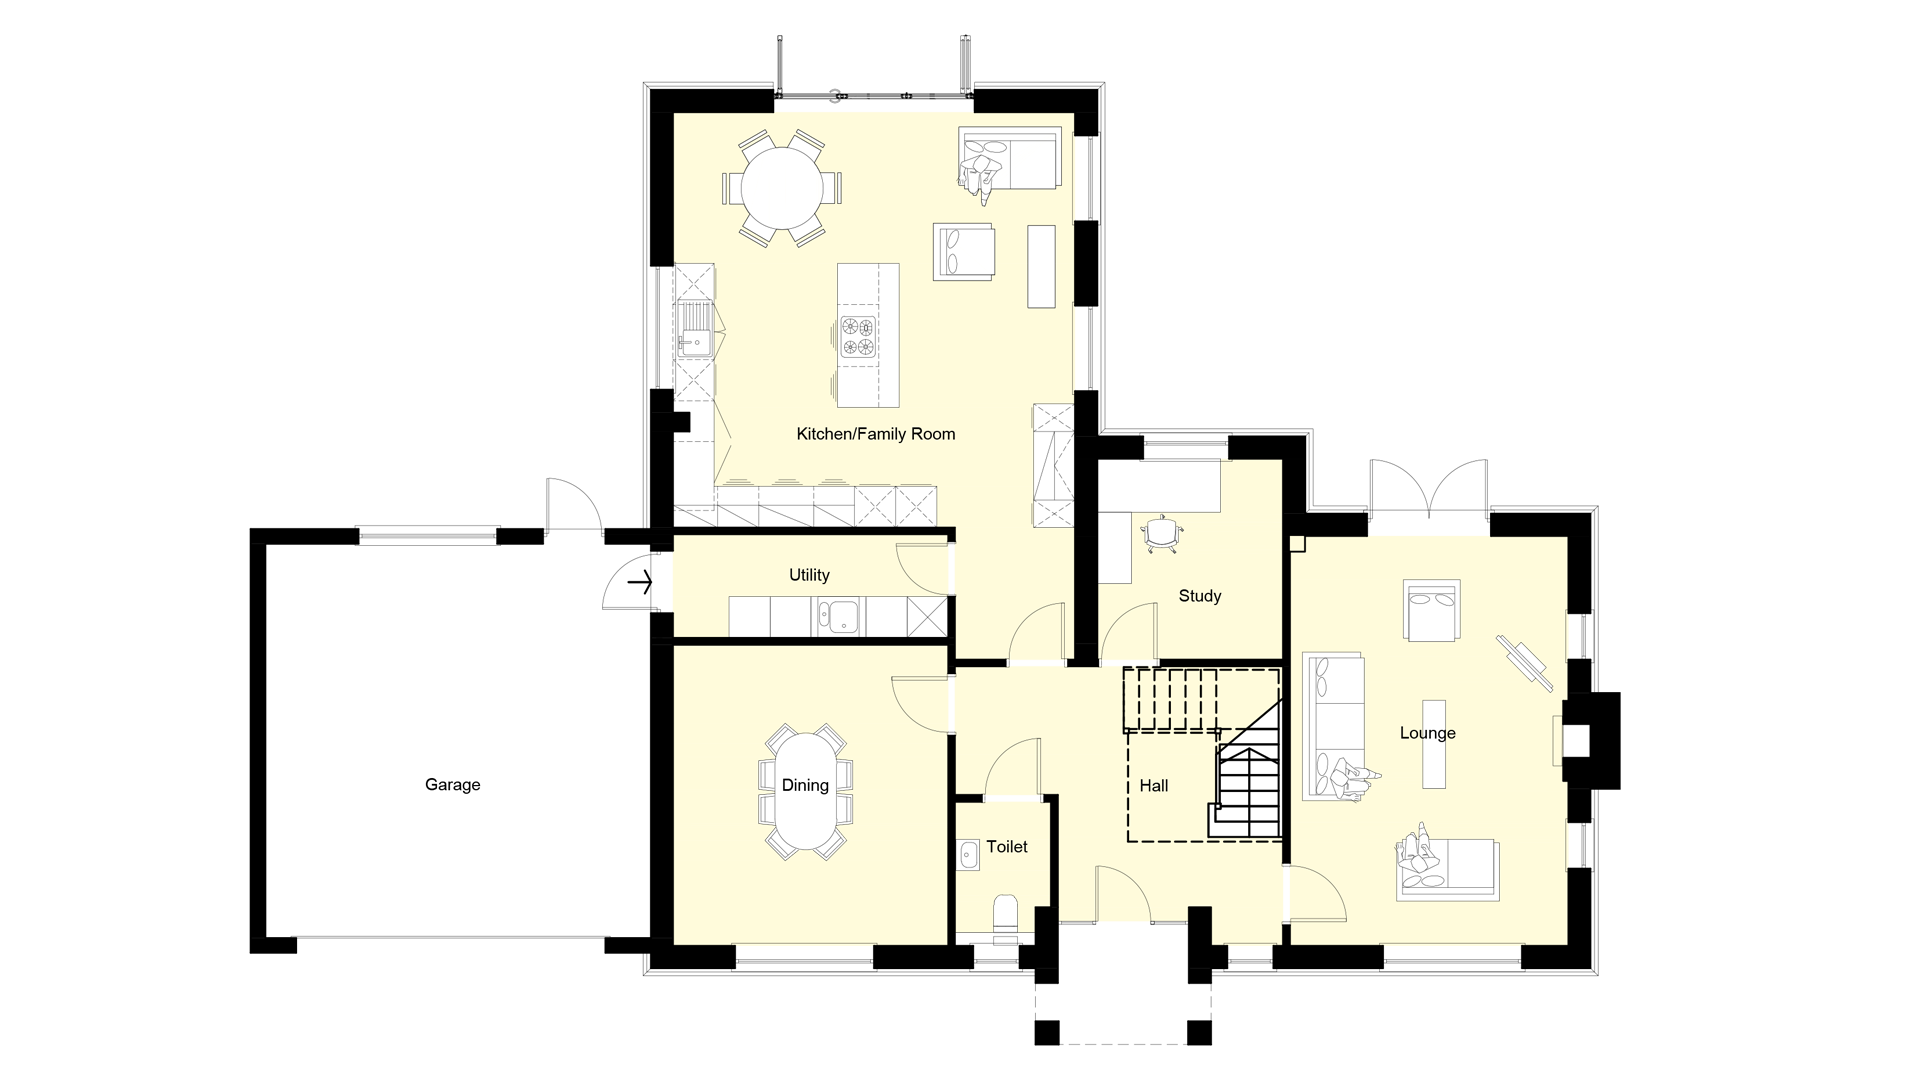 Layout of the ground floor at Weavers park development.